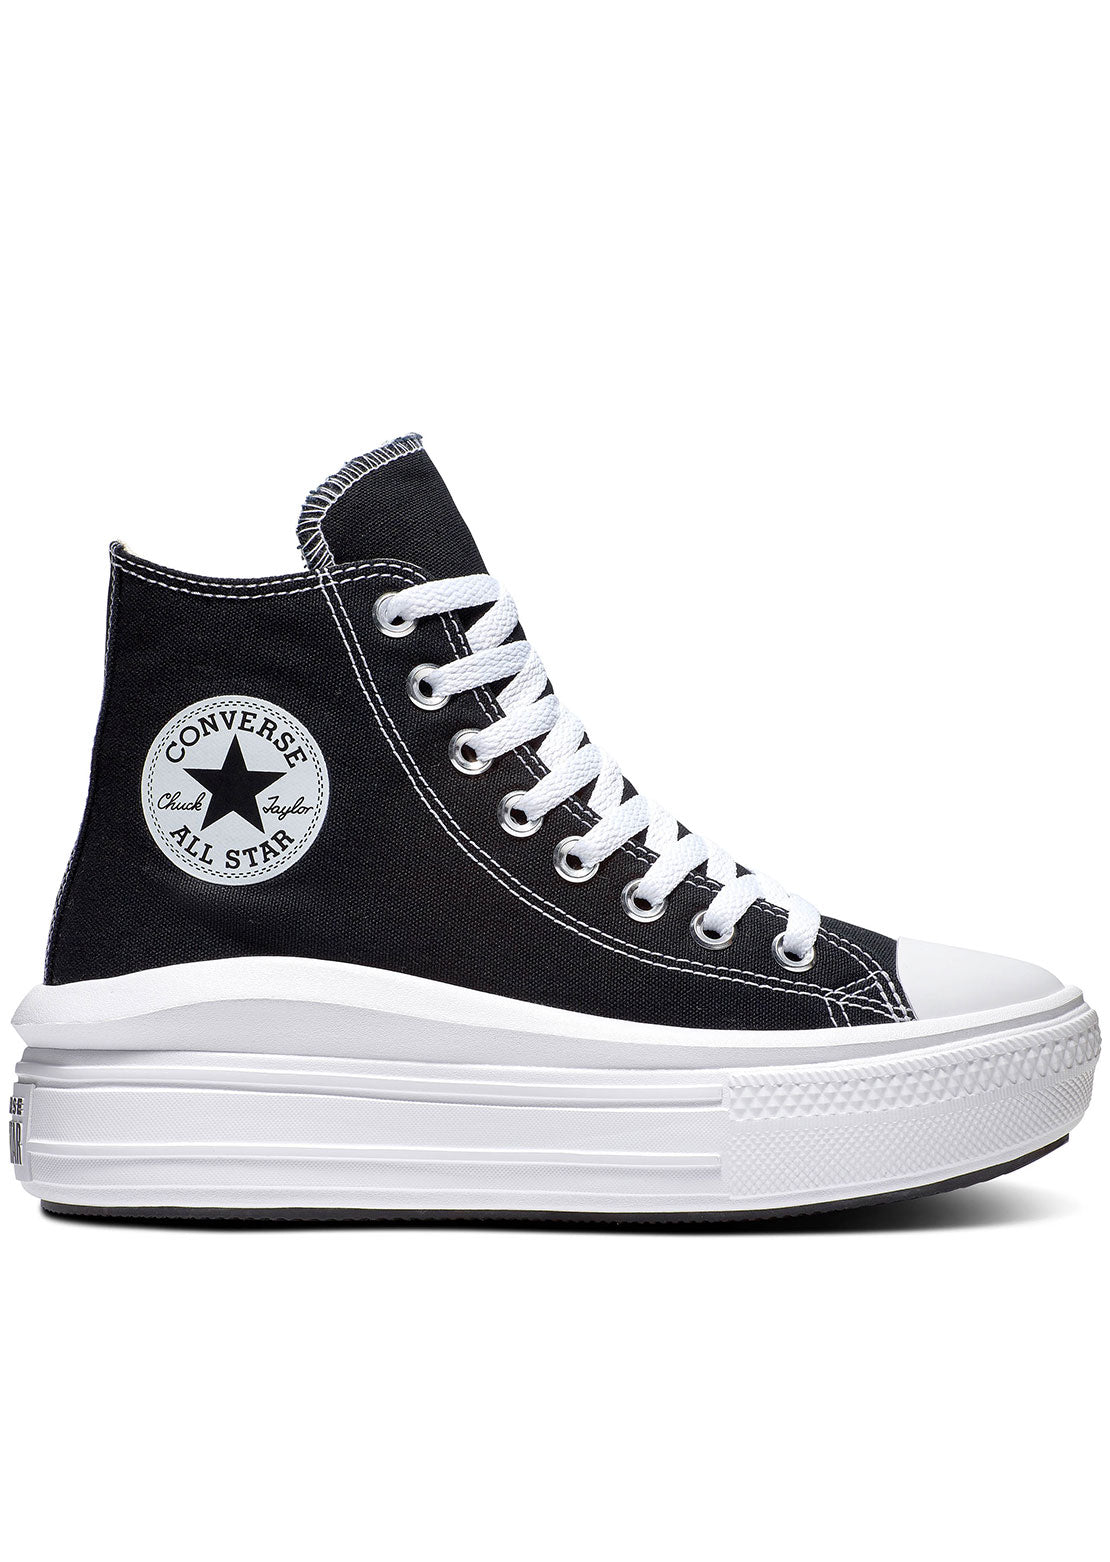 Converse Women&#39;s Chuck Taylor All Star Move Platform Shoes Black/Natural Ivory/White